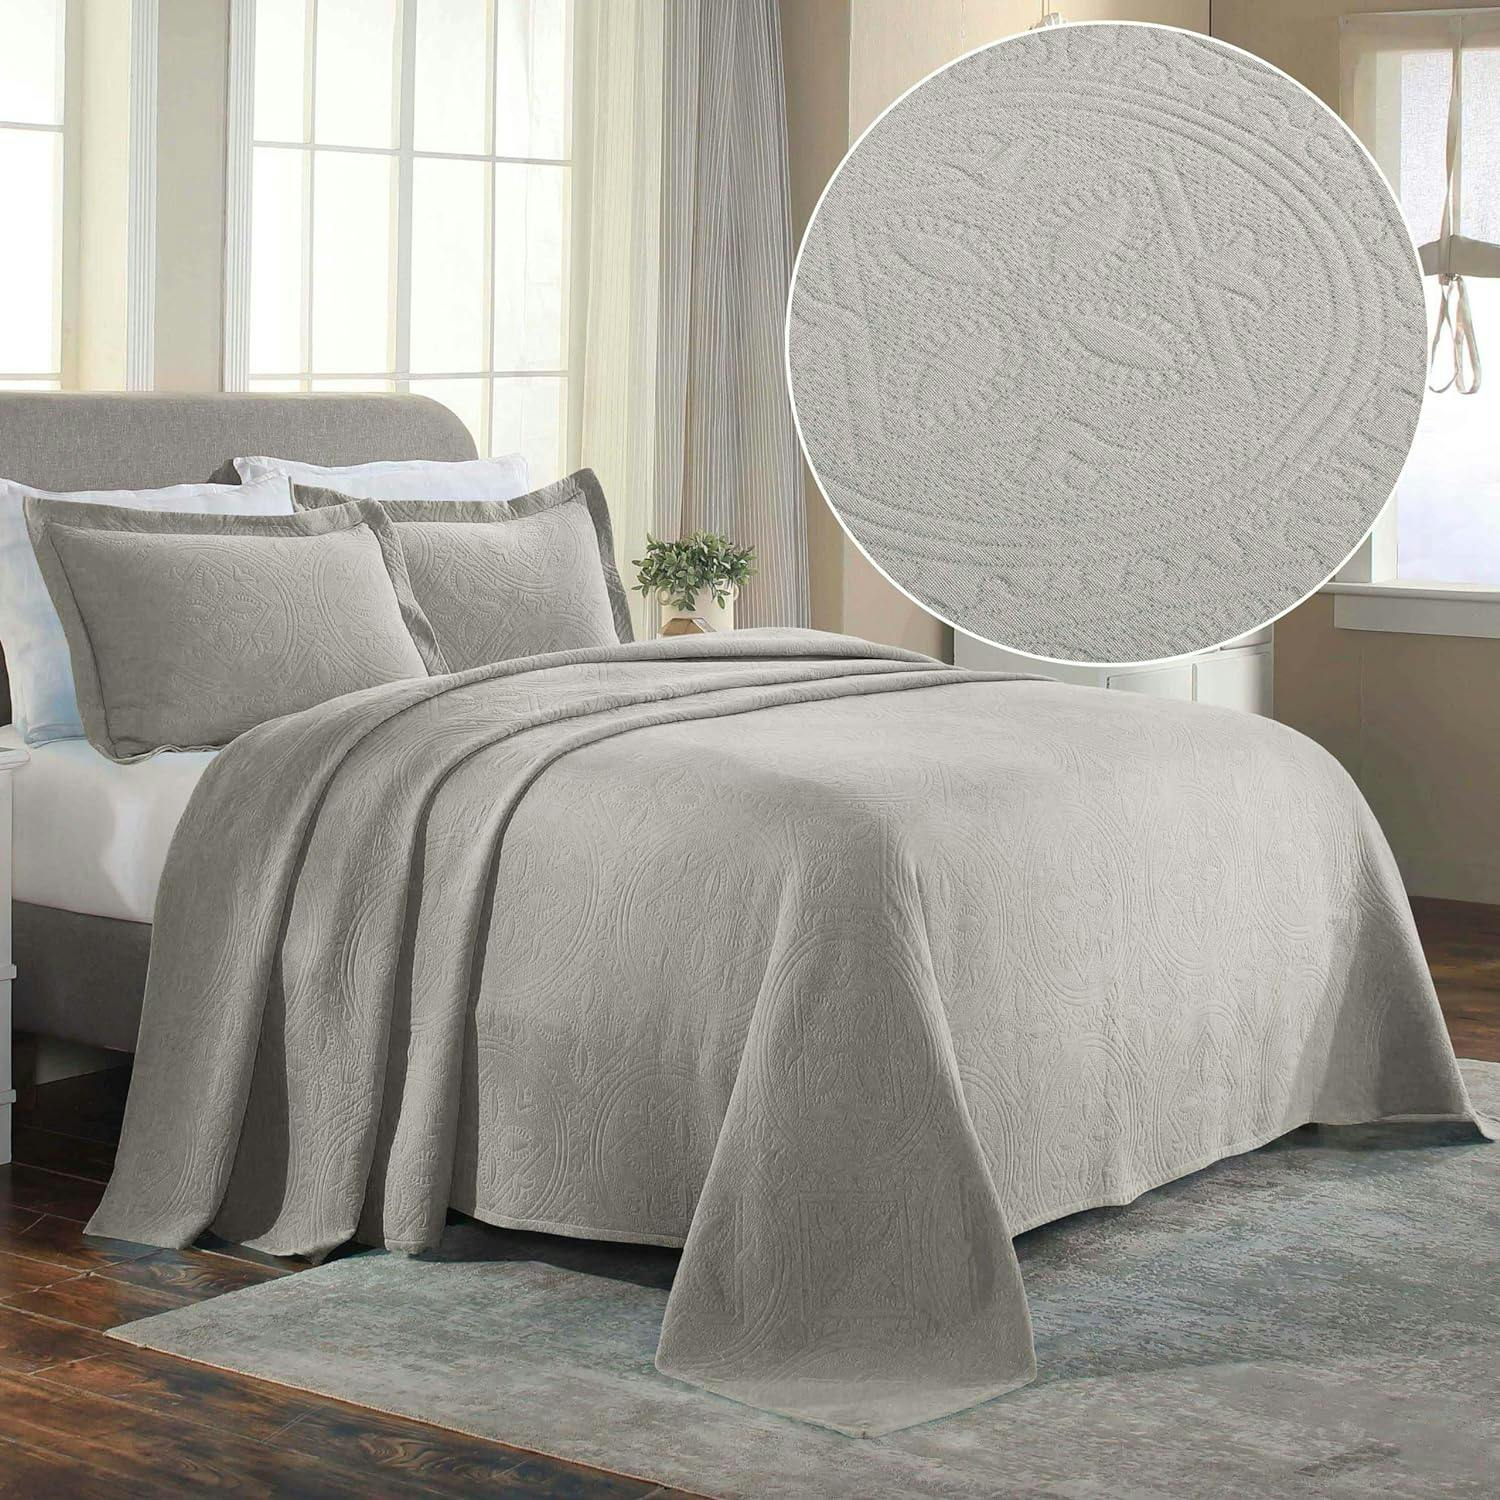 Celtic Circles King White Cotton Bedspread and Pillow Shams Set